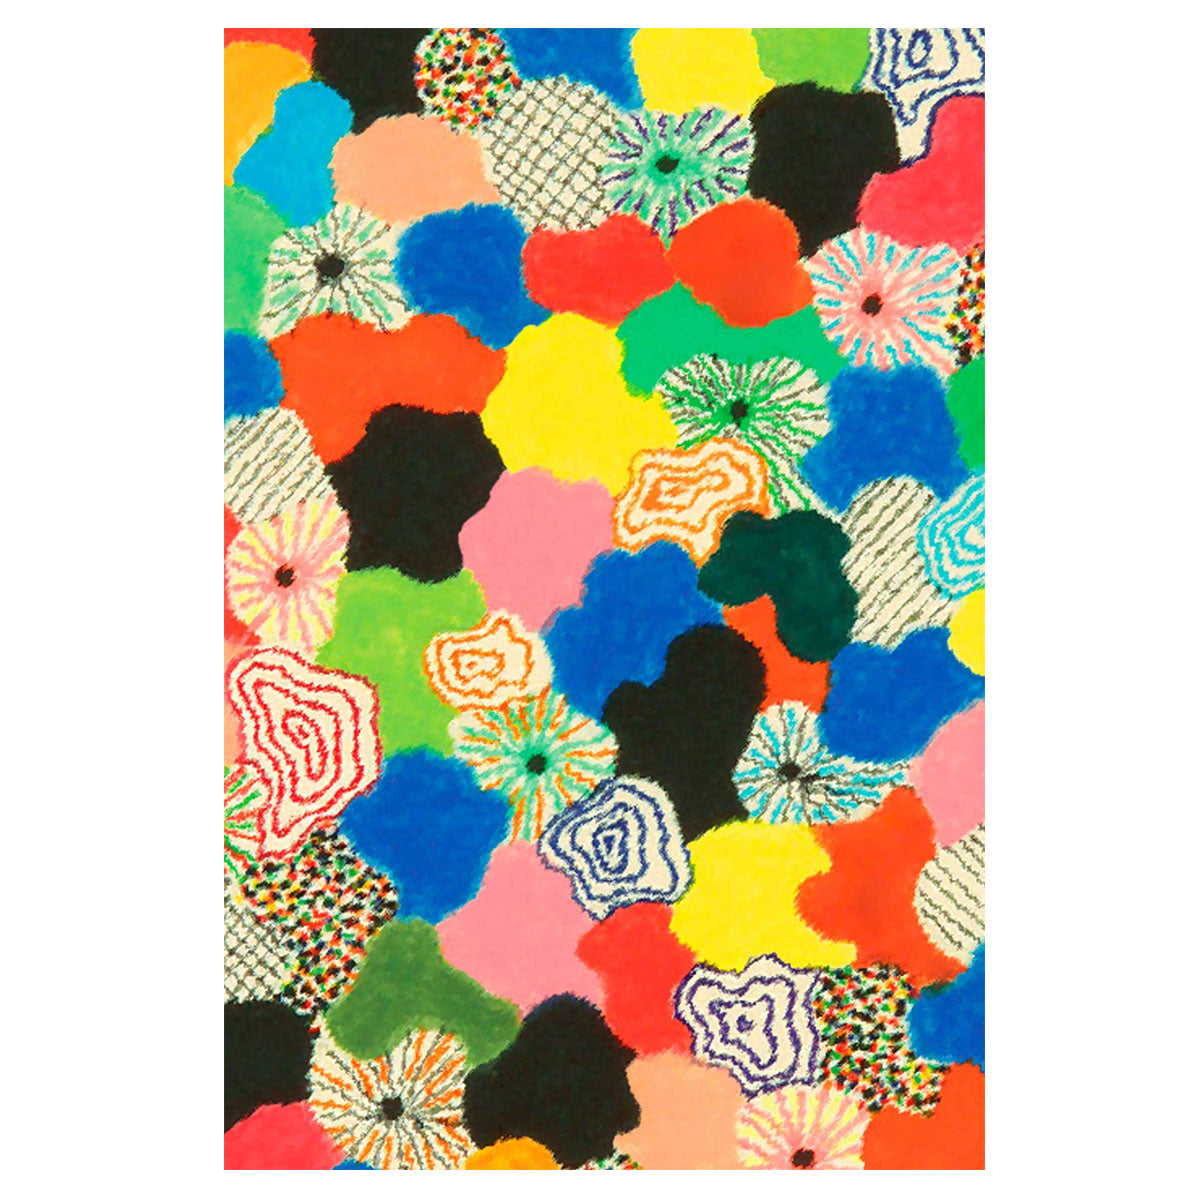 Patch Carpet by Alessandro Mendini - Qeeboo